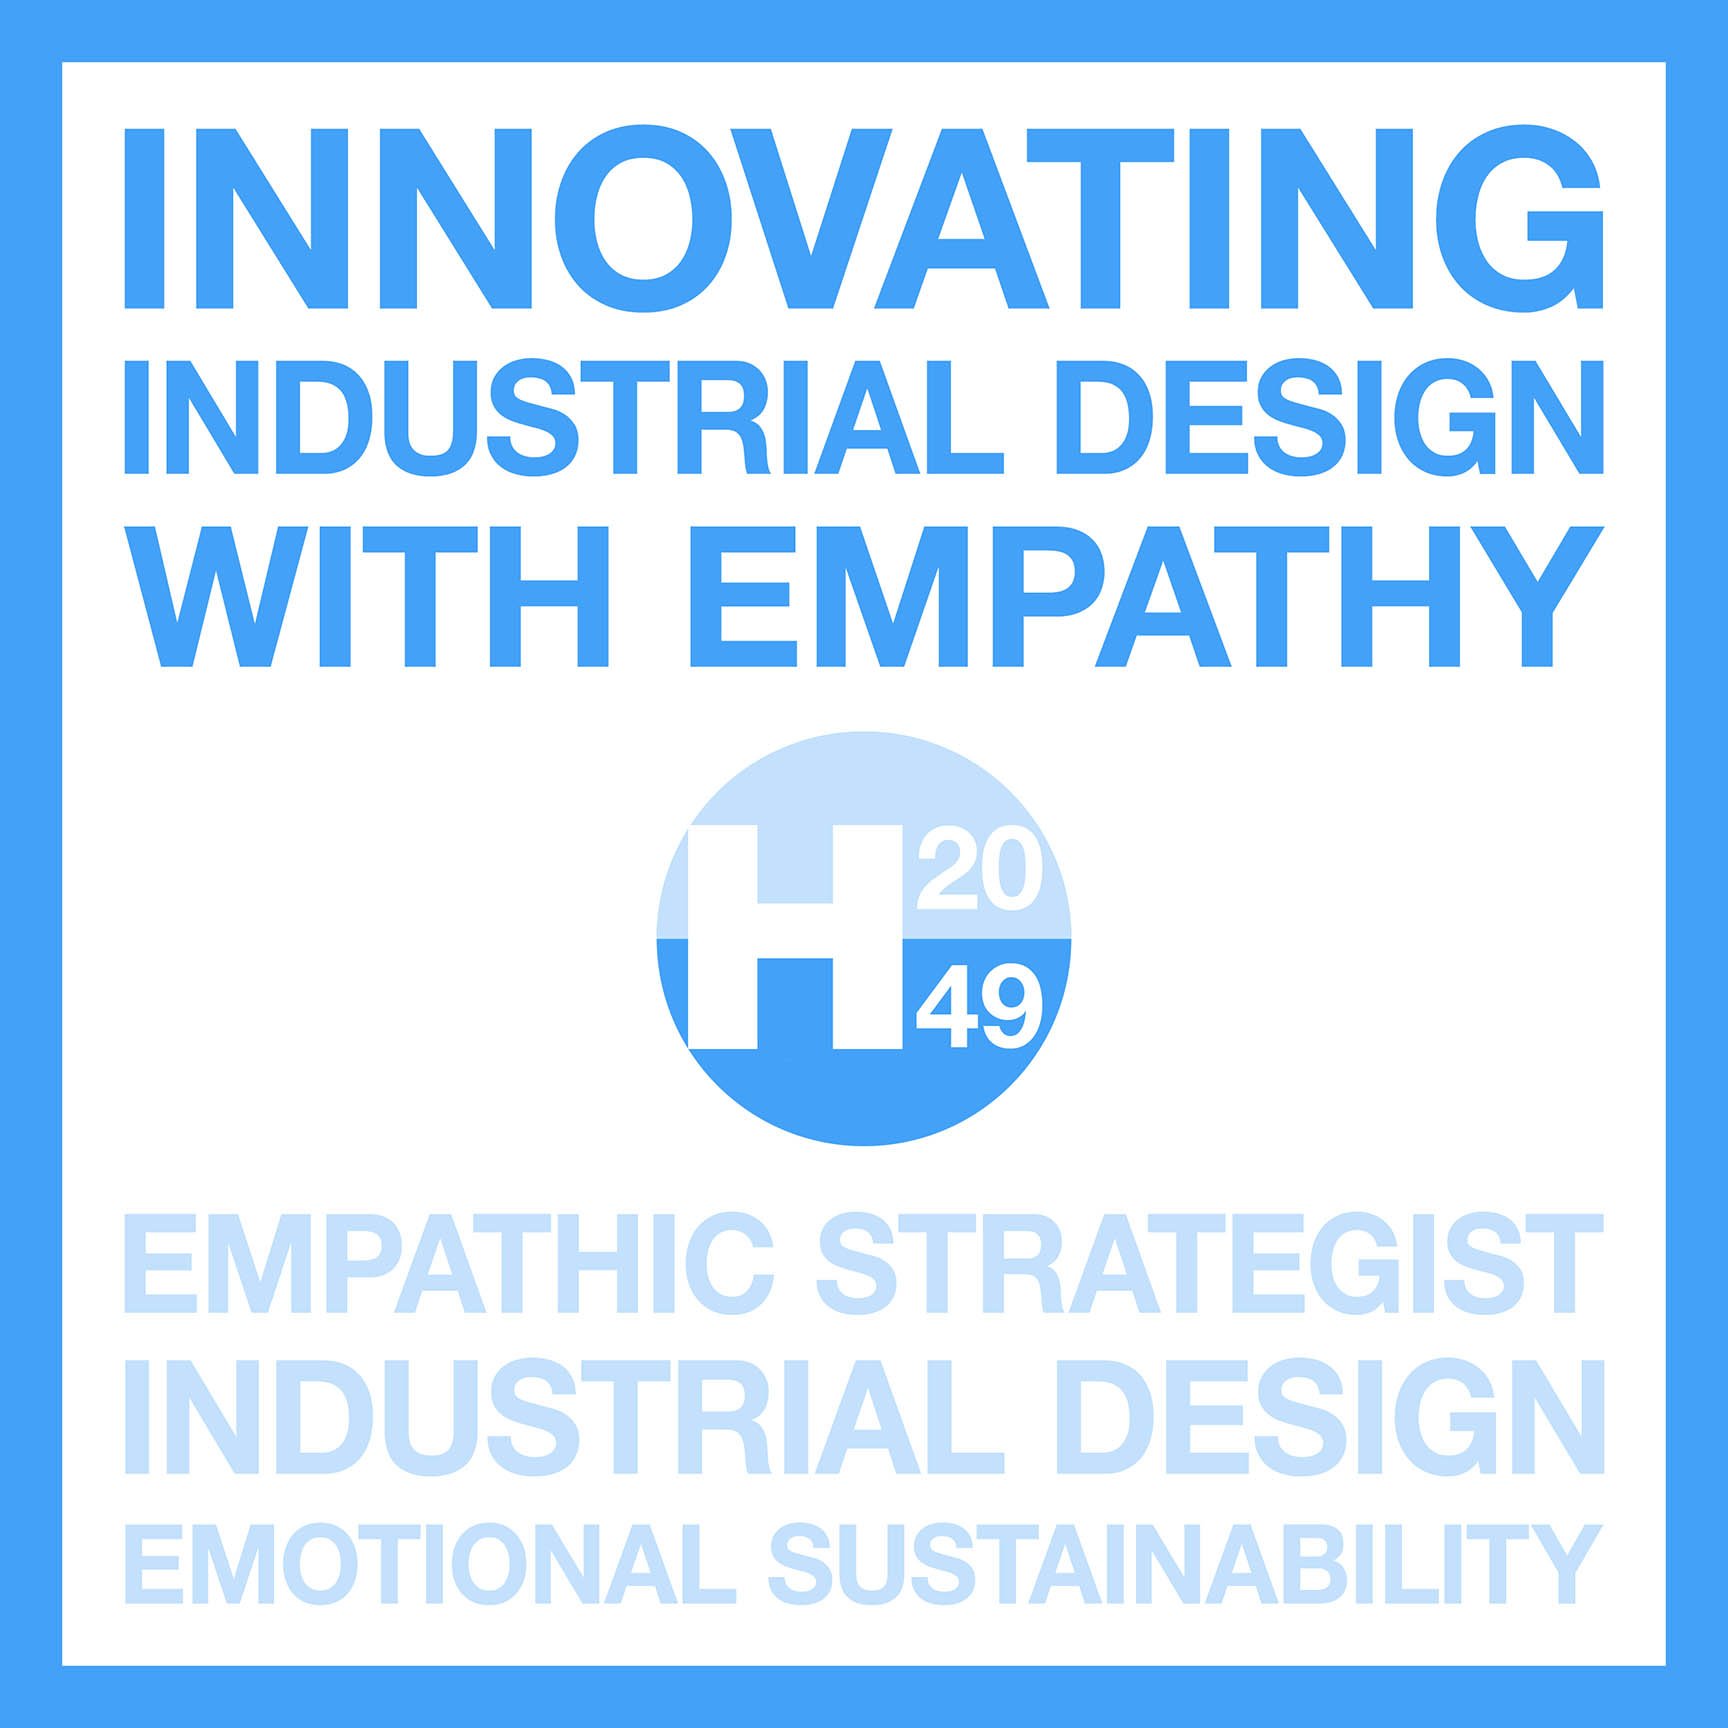 Innovating Industrial design with empathy